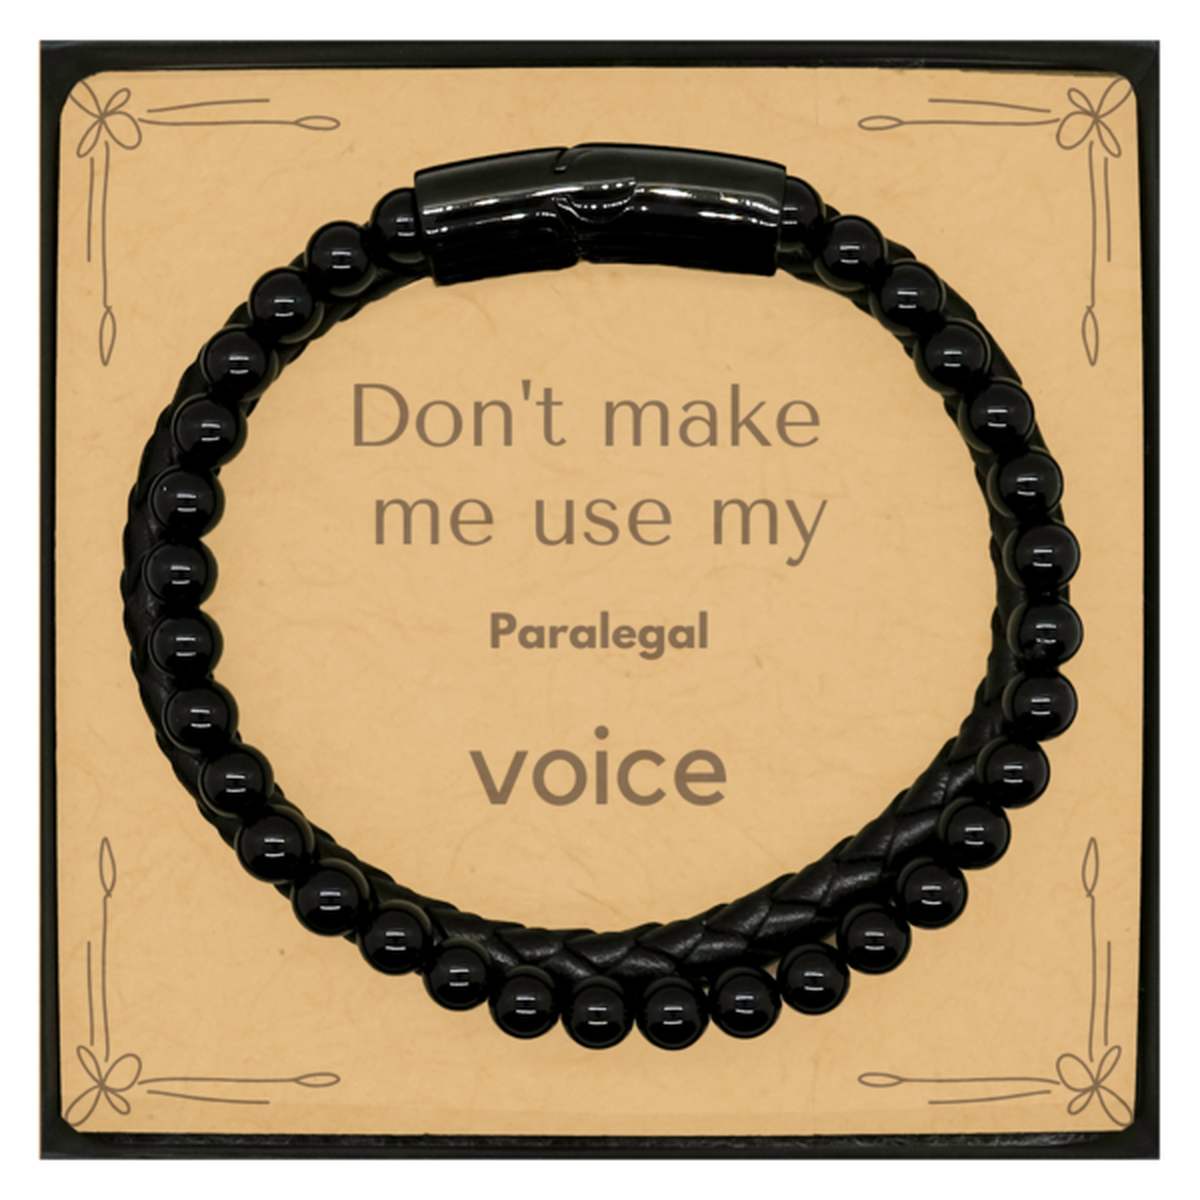 Don't make me use my Paralegal voice, Sarcasm Paralegal Card Gifts, Christmas Paralegal Stone Leather Bracelets Birthday Unique Gifts For Paralegal Coworkers, Men, Women, Colleague, Friends